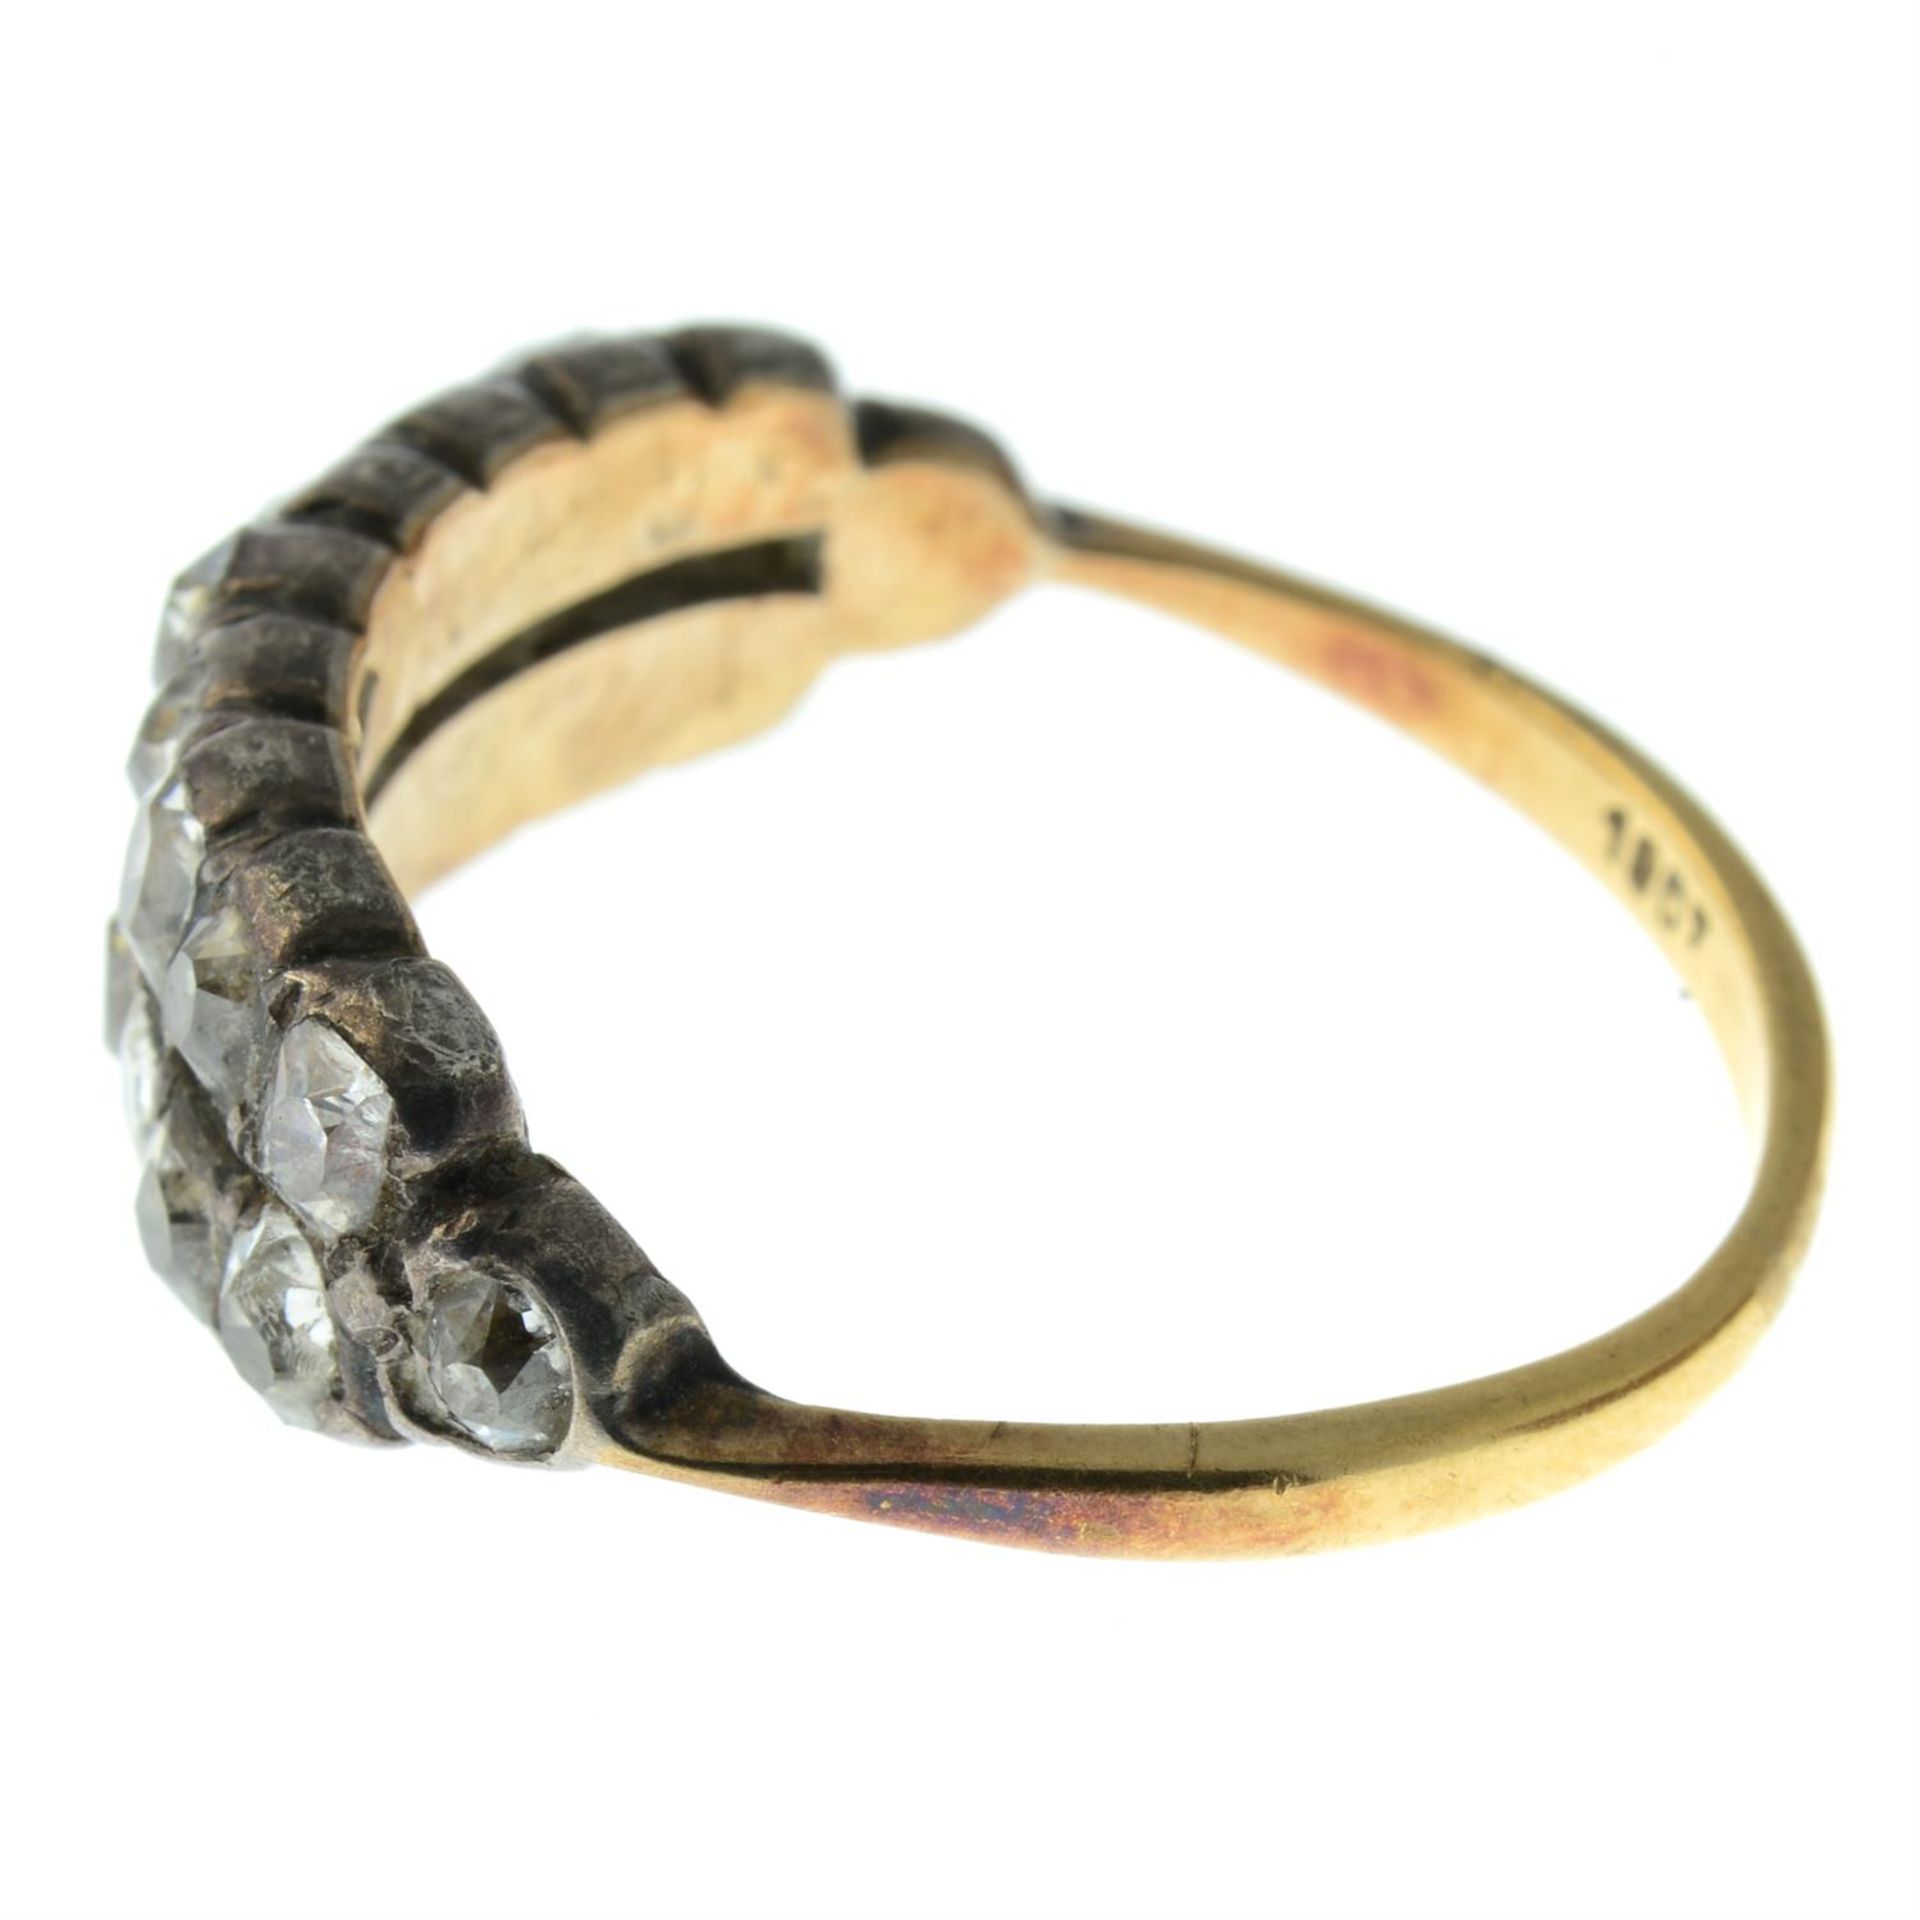 A late Georgian/early 19th century silver and gold old-cut diamond two-row ring. - Image 3 of 5